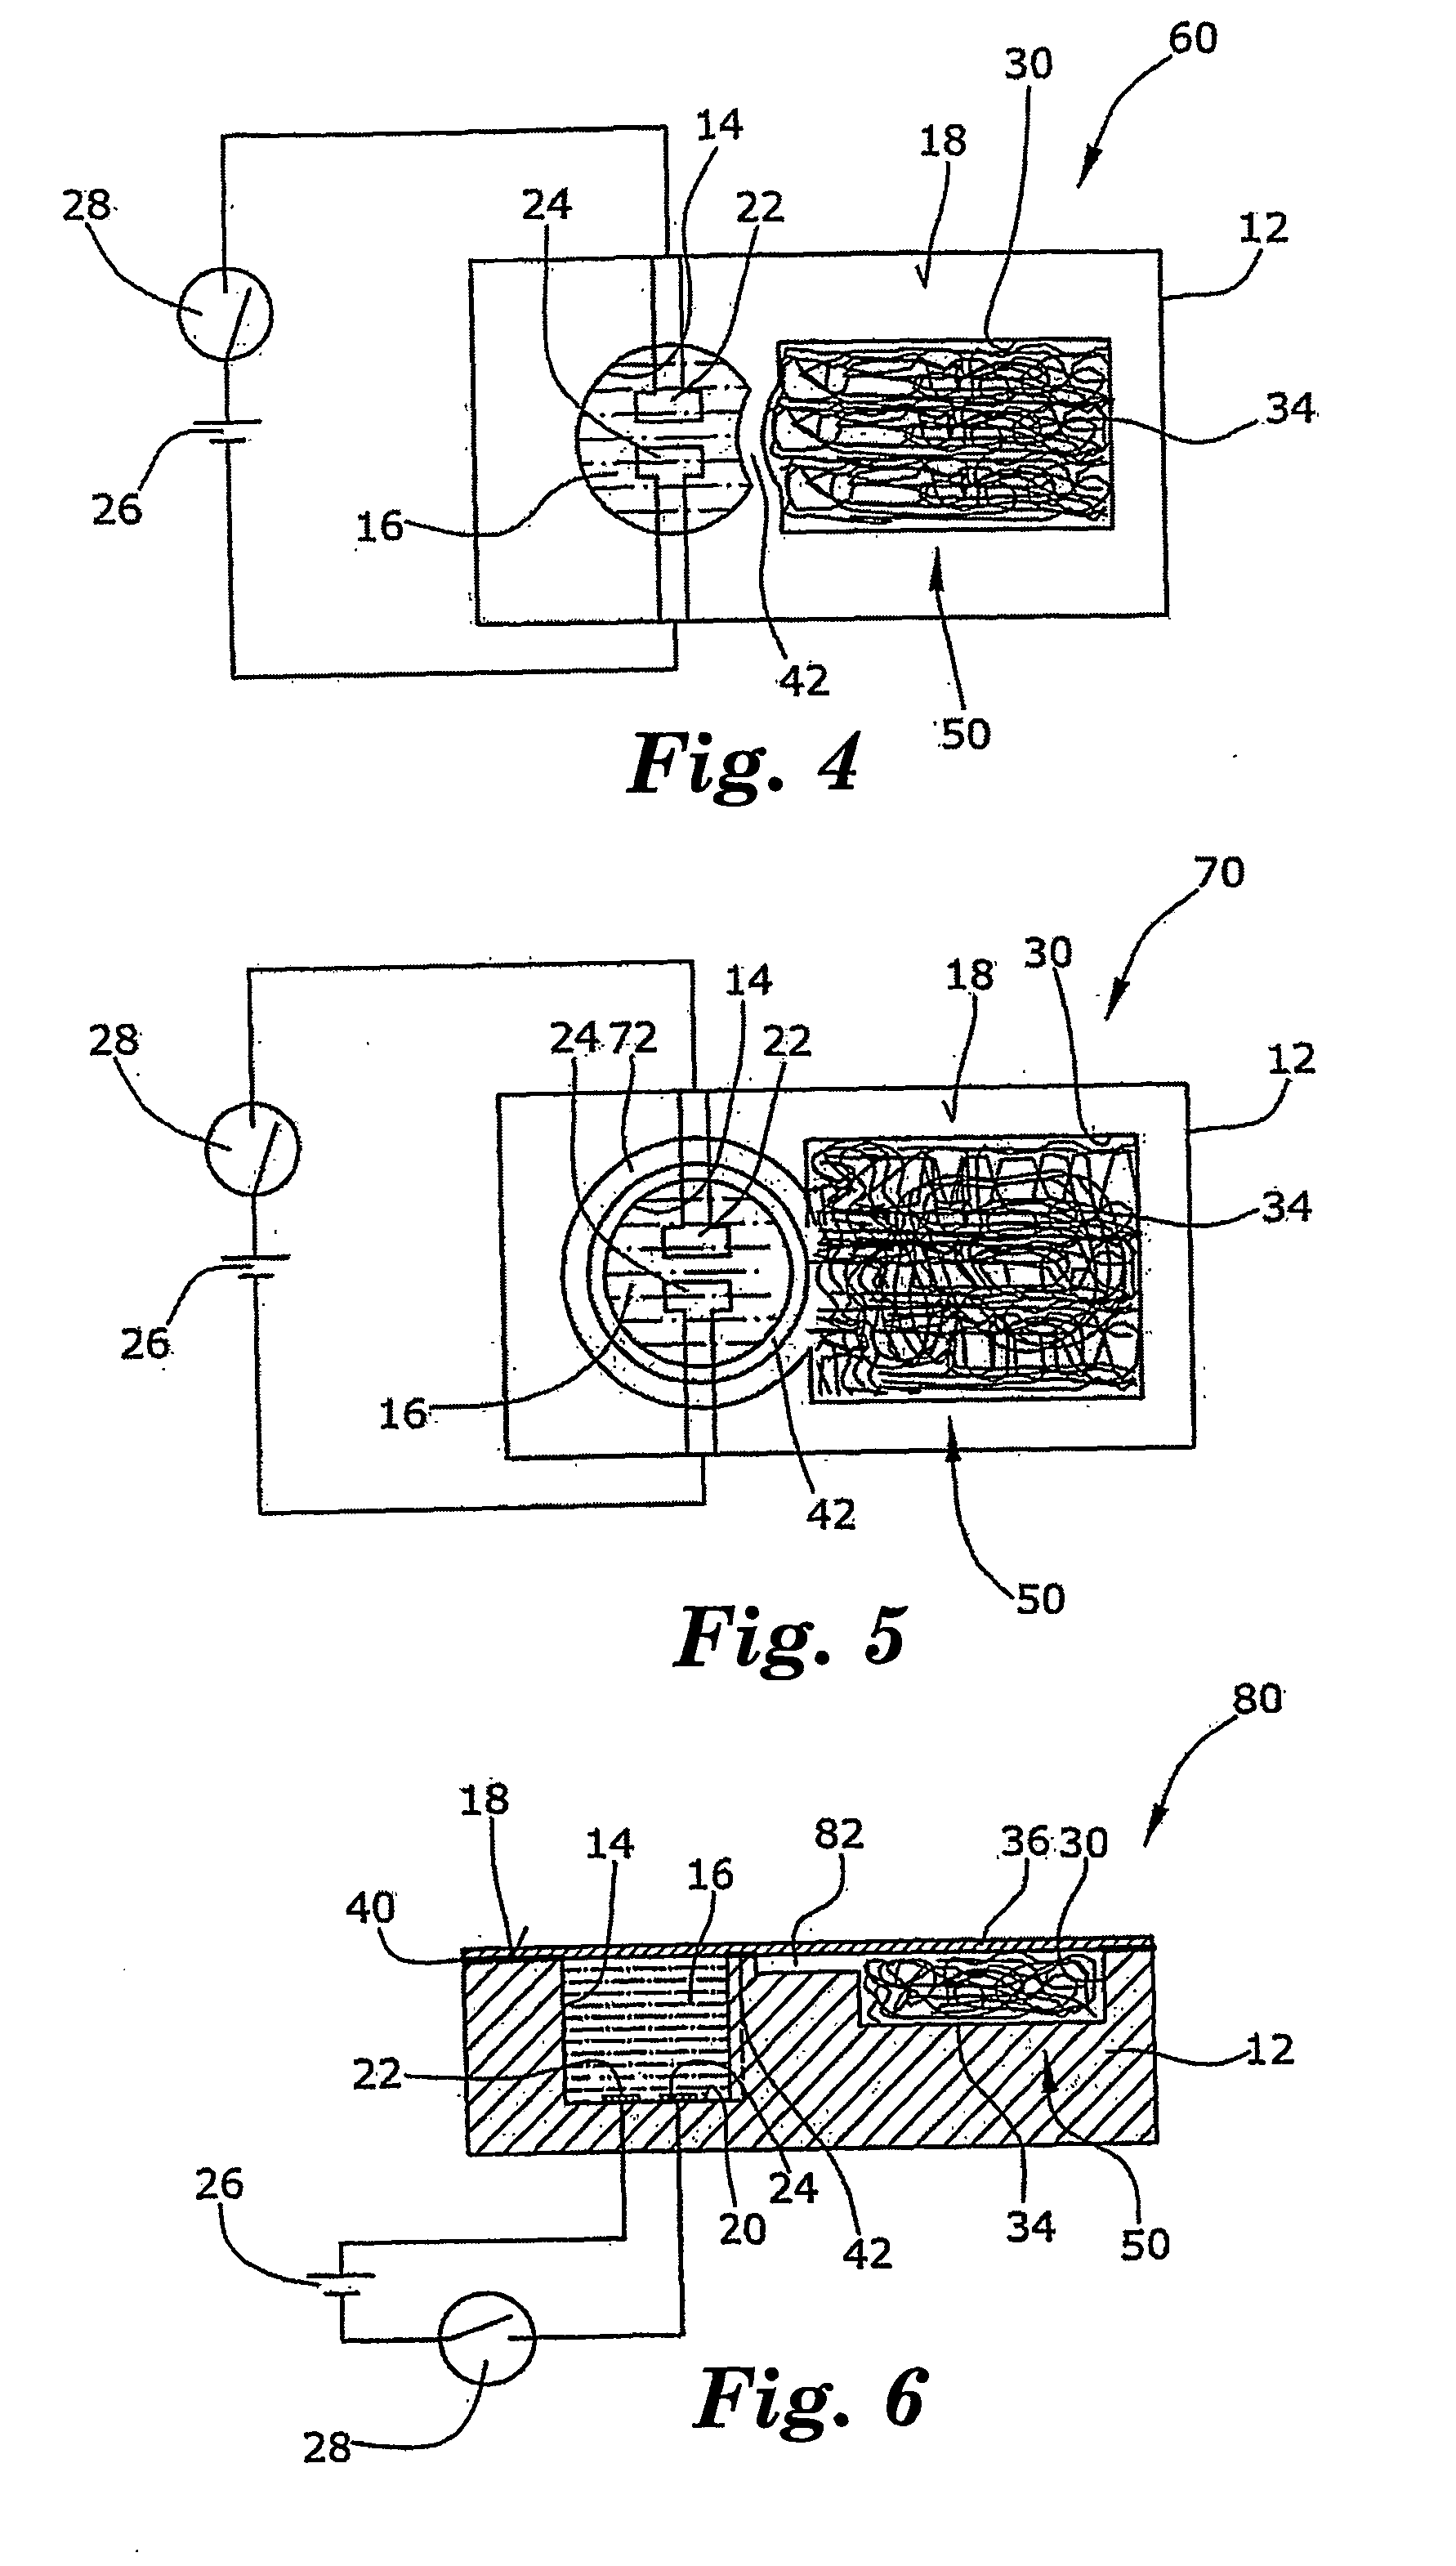 Display device for irreversibly switching from a first state to a second state